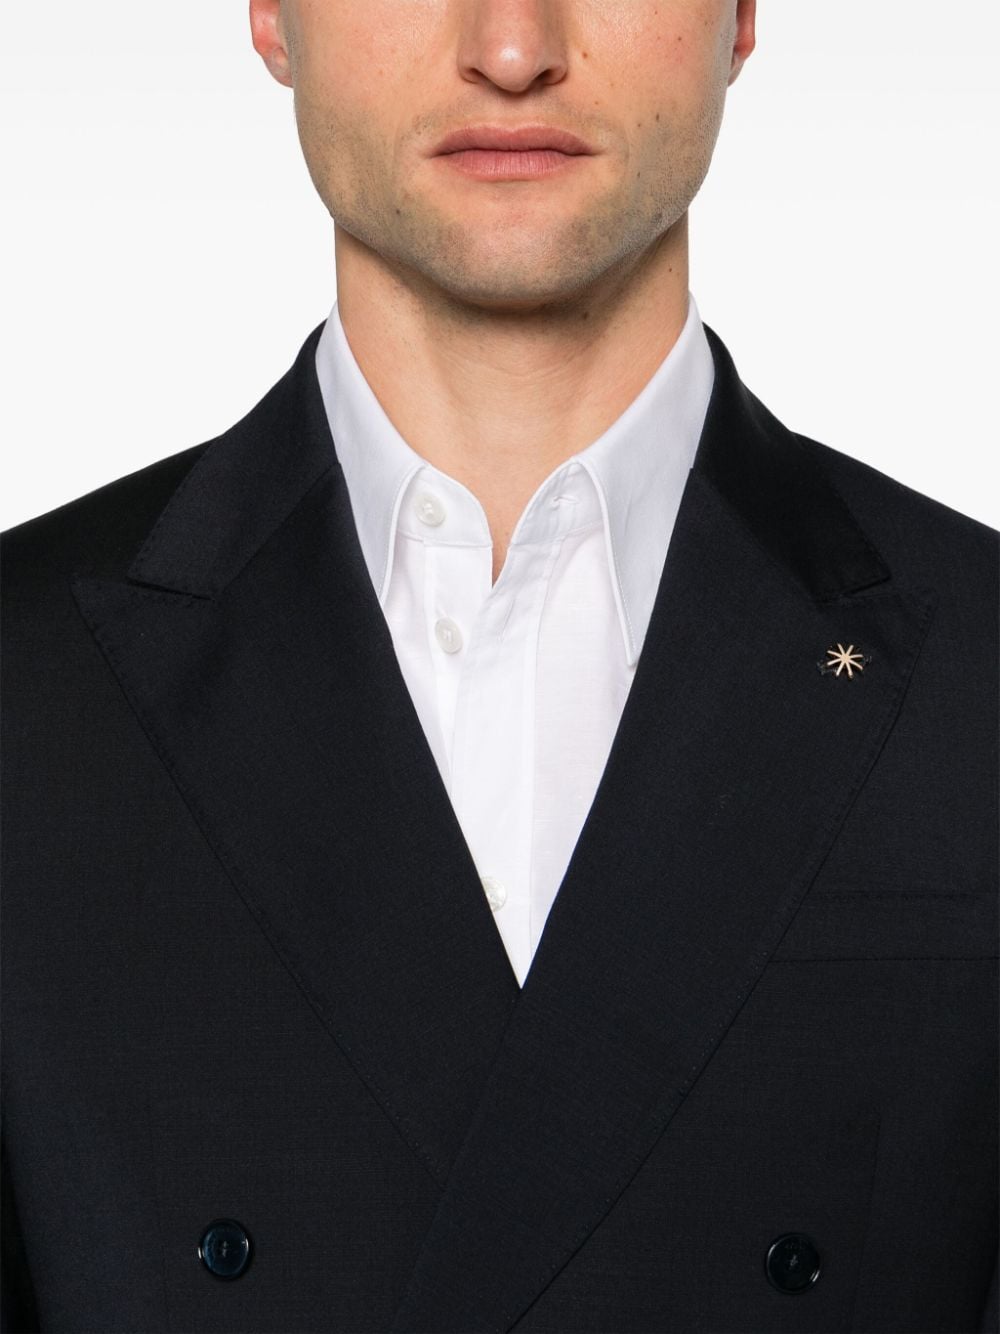 Navy blue double-breasted suit